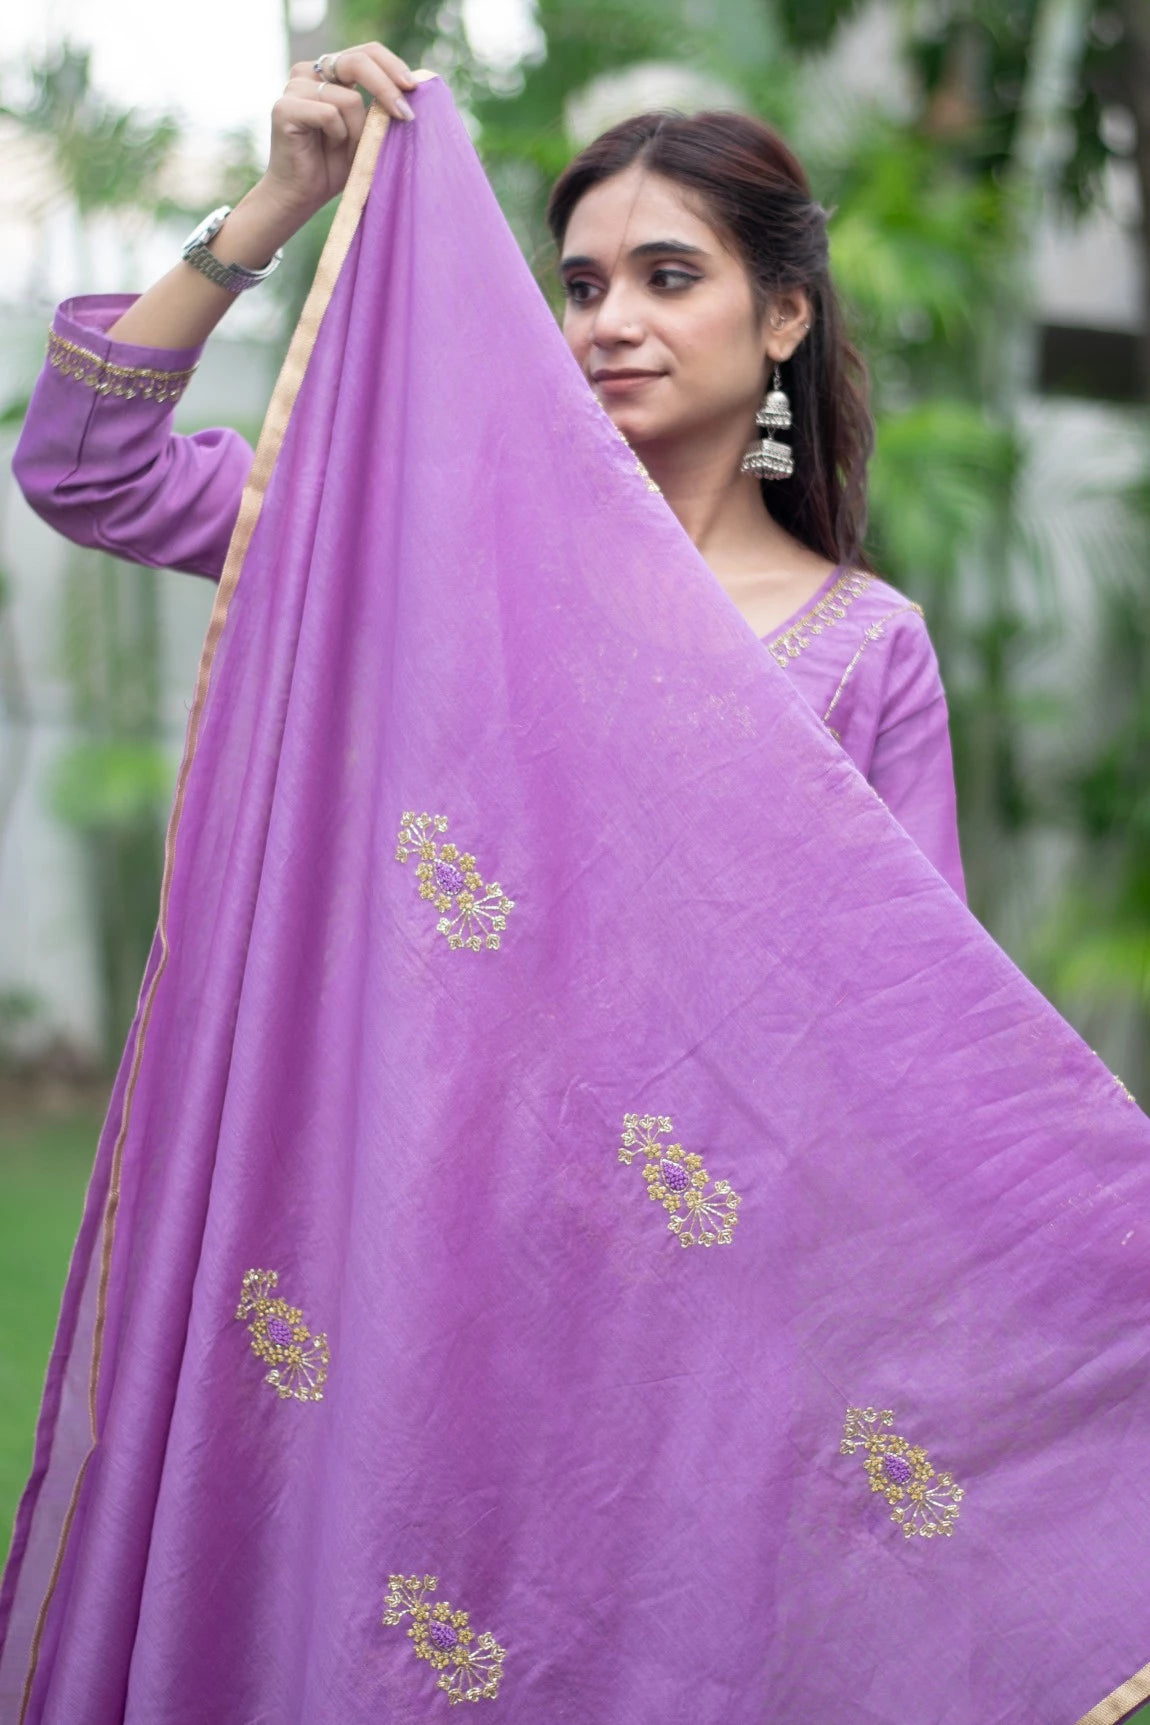 The subject of this image is a woman wearing a beautifully designed purple lilac kurta with loose-fitting trousers.